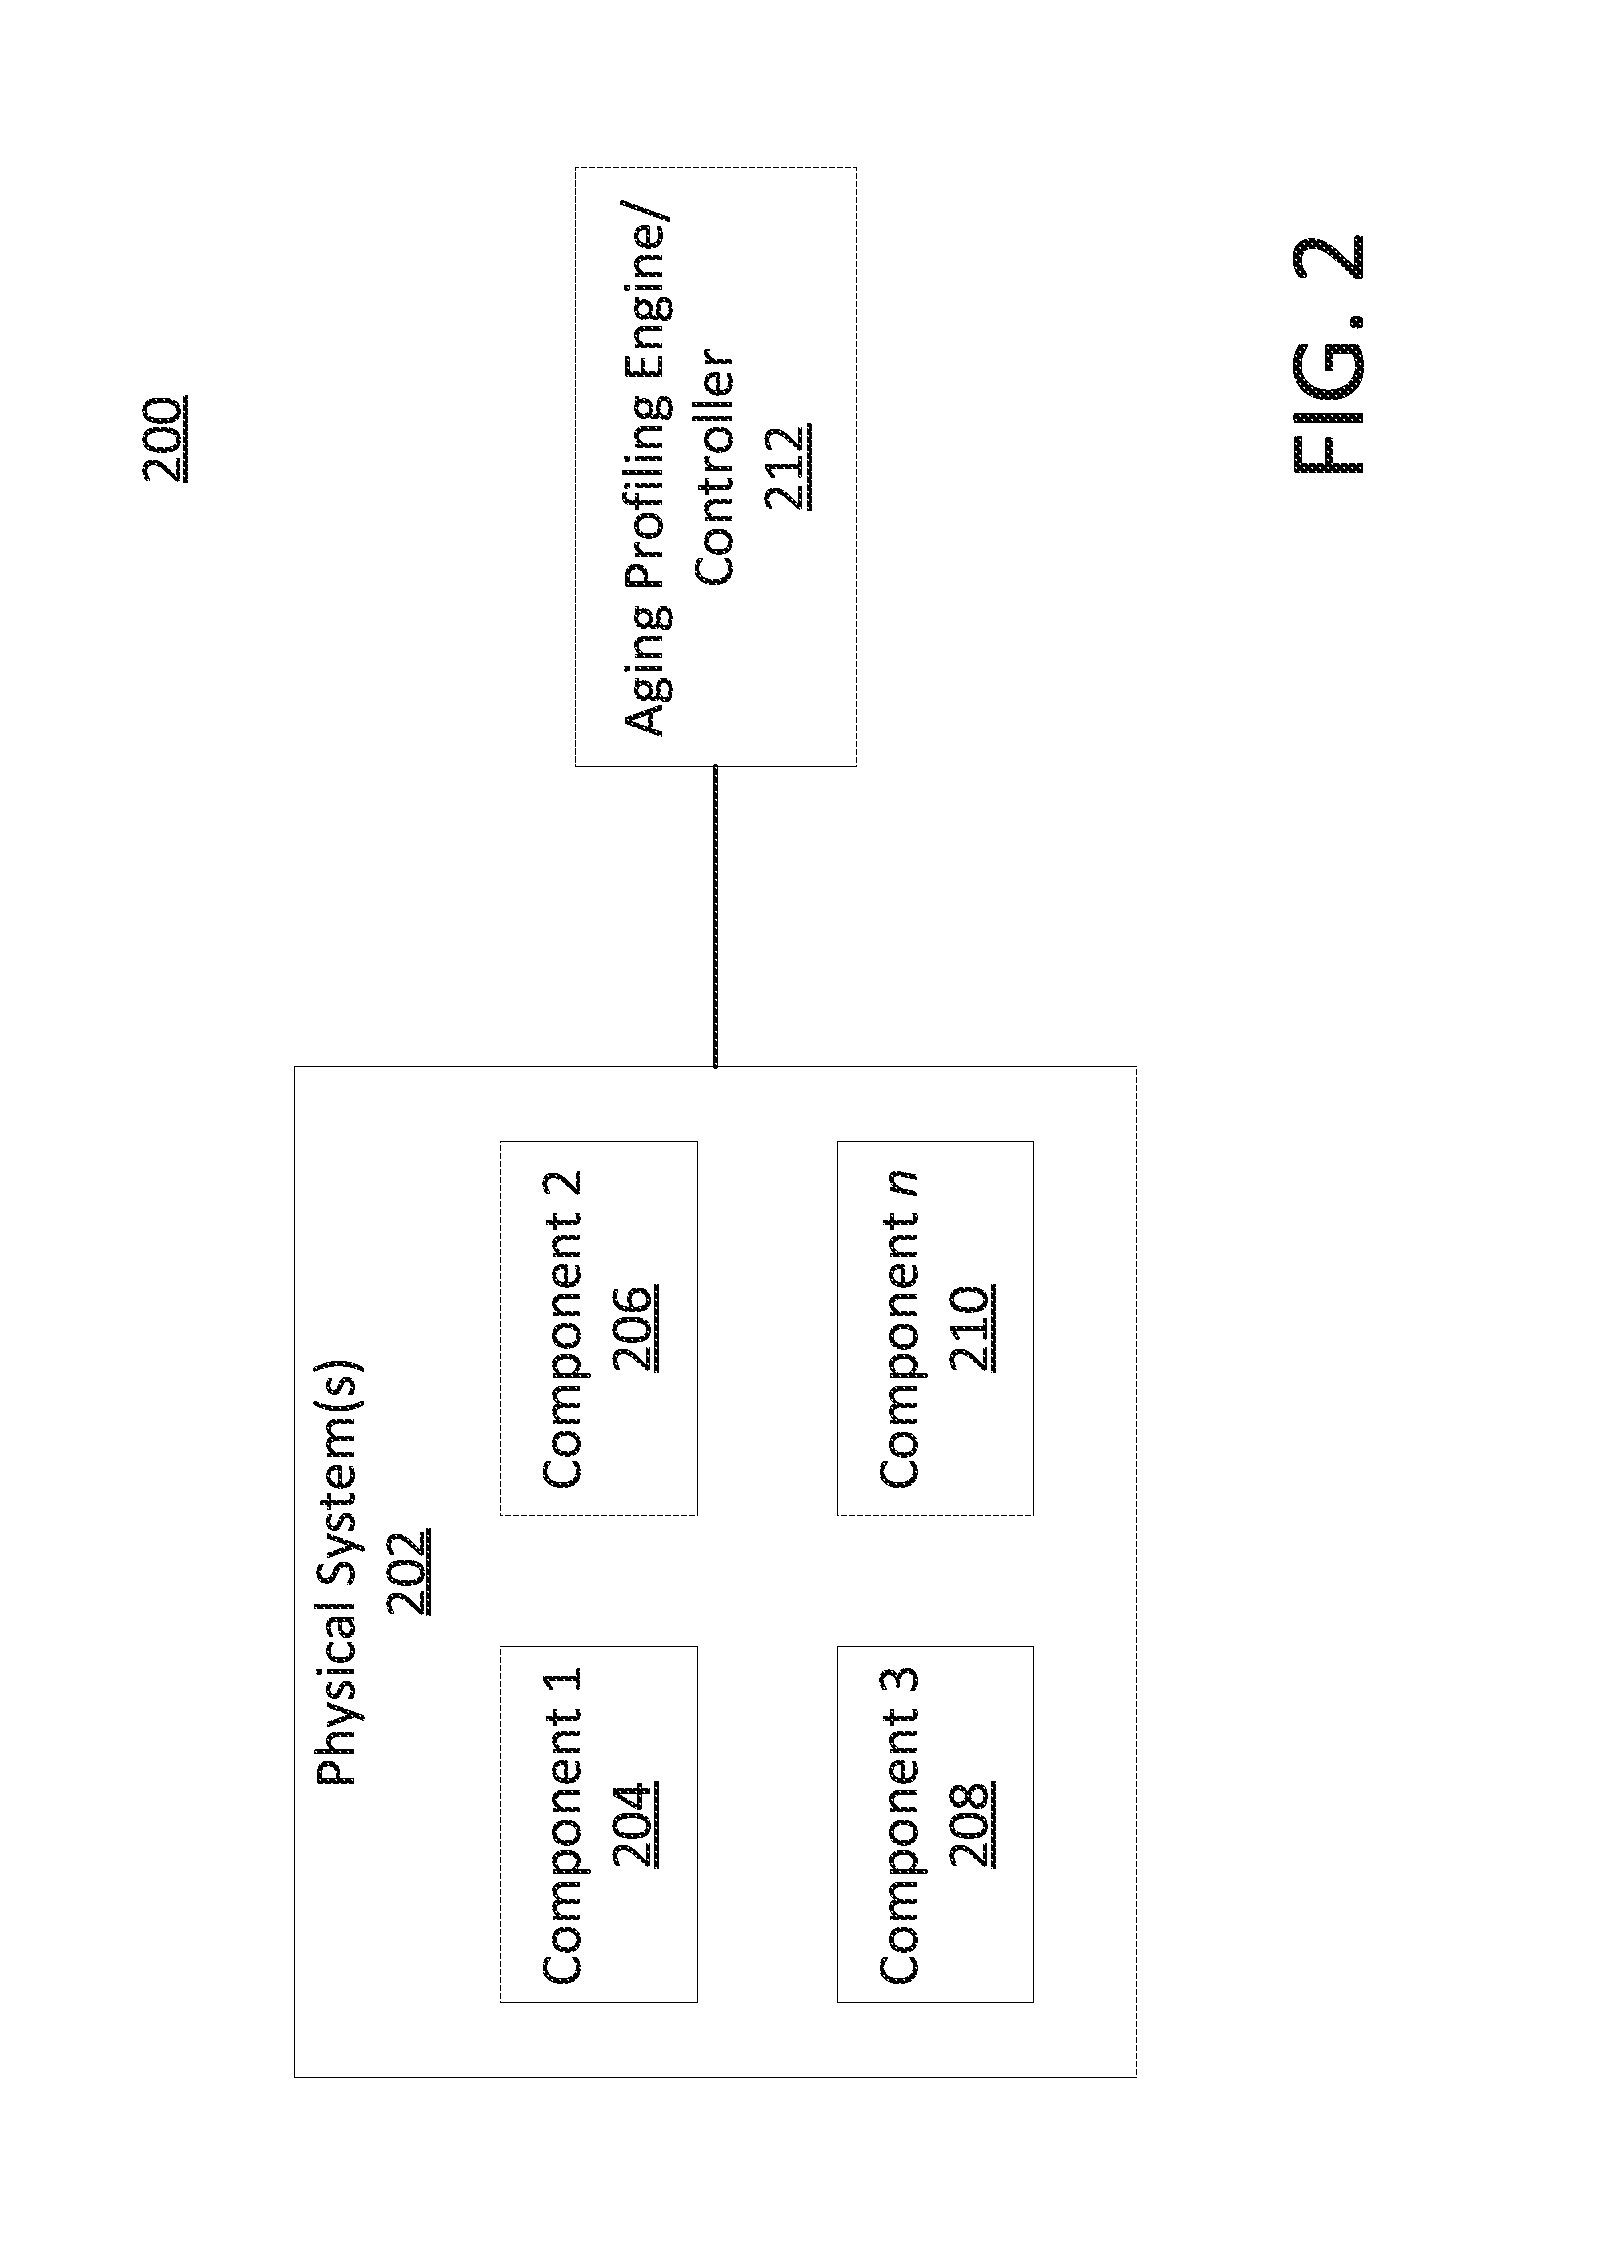 Aging profiling engine for physical systems